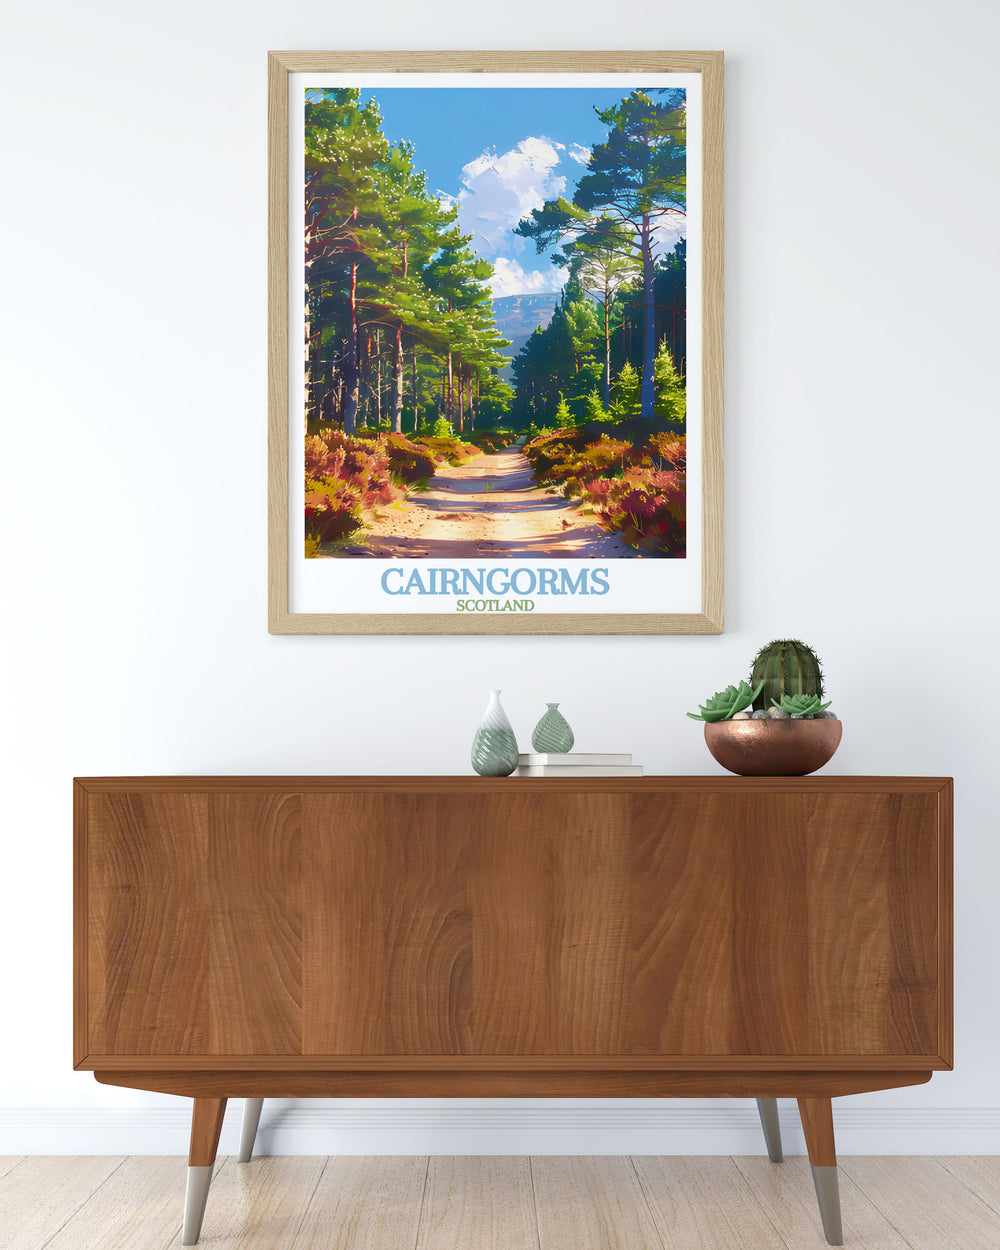 Rothiemurchus Forest wall art featuring the tranquil and stunning vistas of the Cairngorms. Ideal for nature lovers and travel enthusiasts. This artwork brings the peace and beauty of the Scottish Highlands into your living room or office.